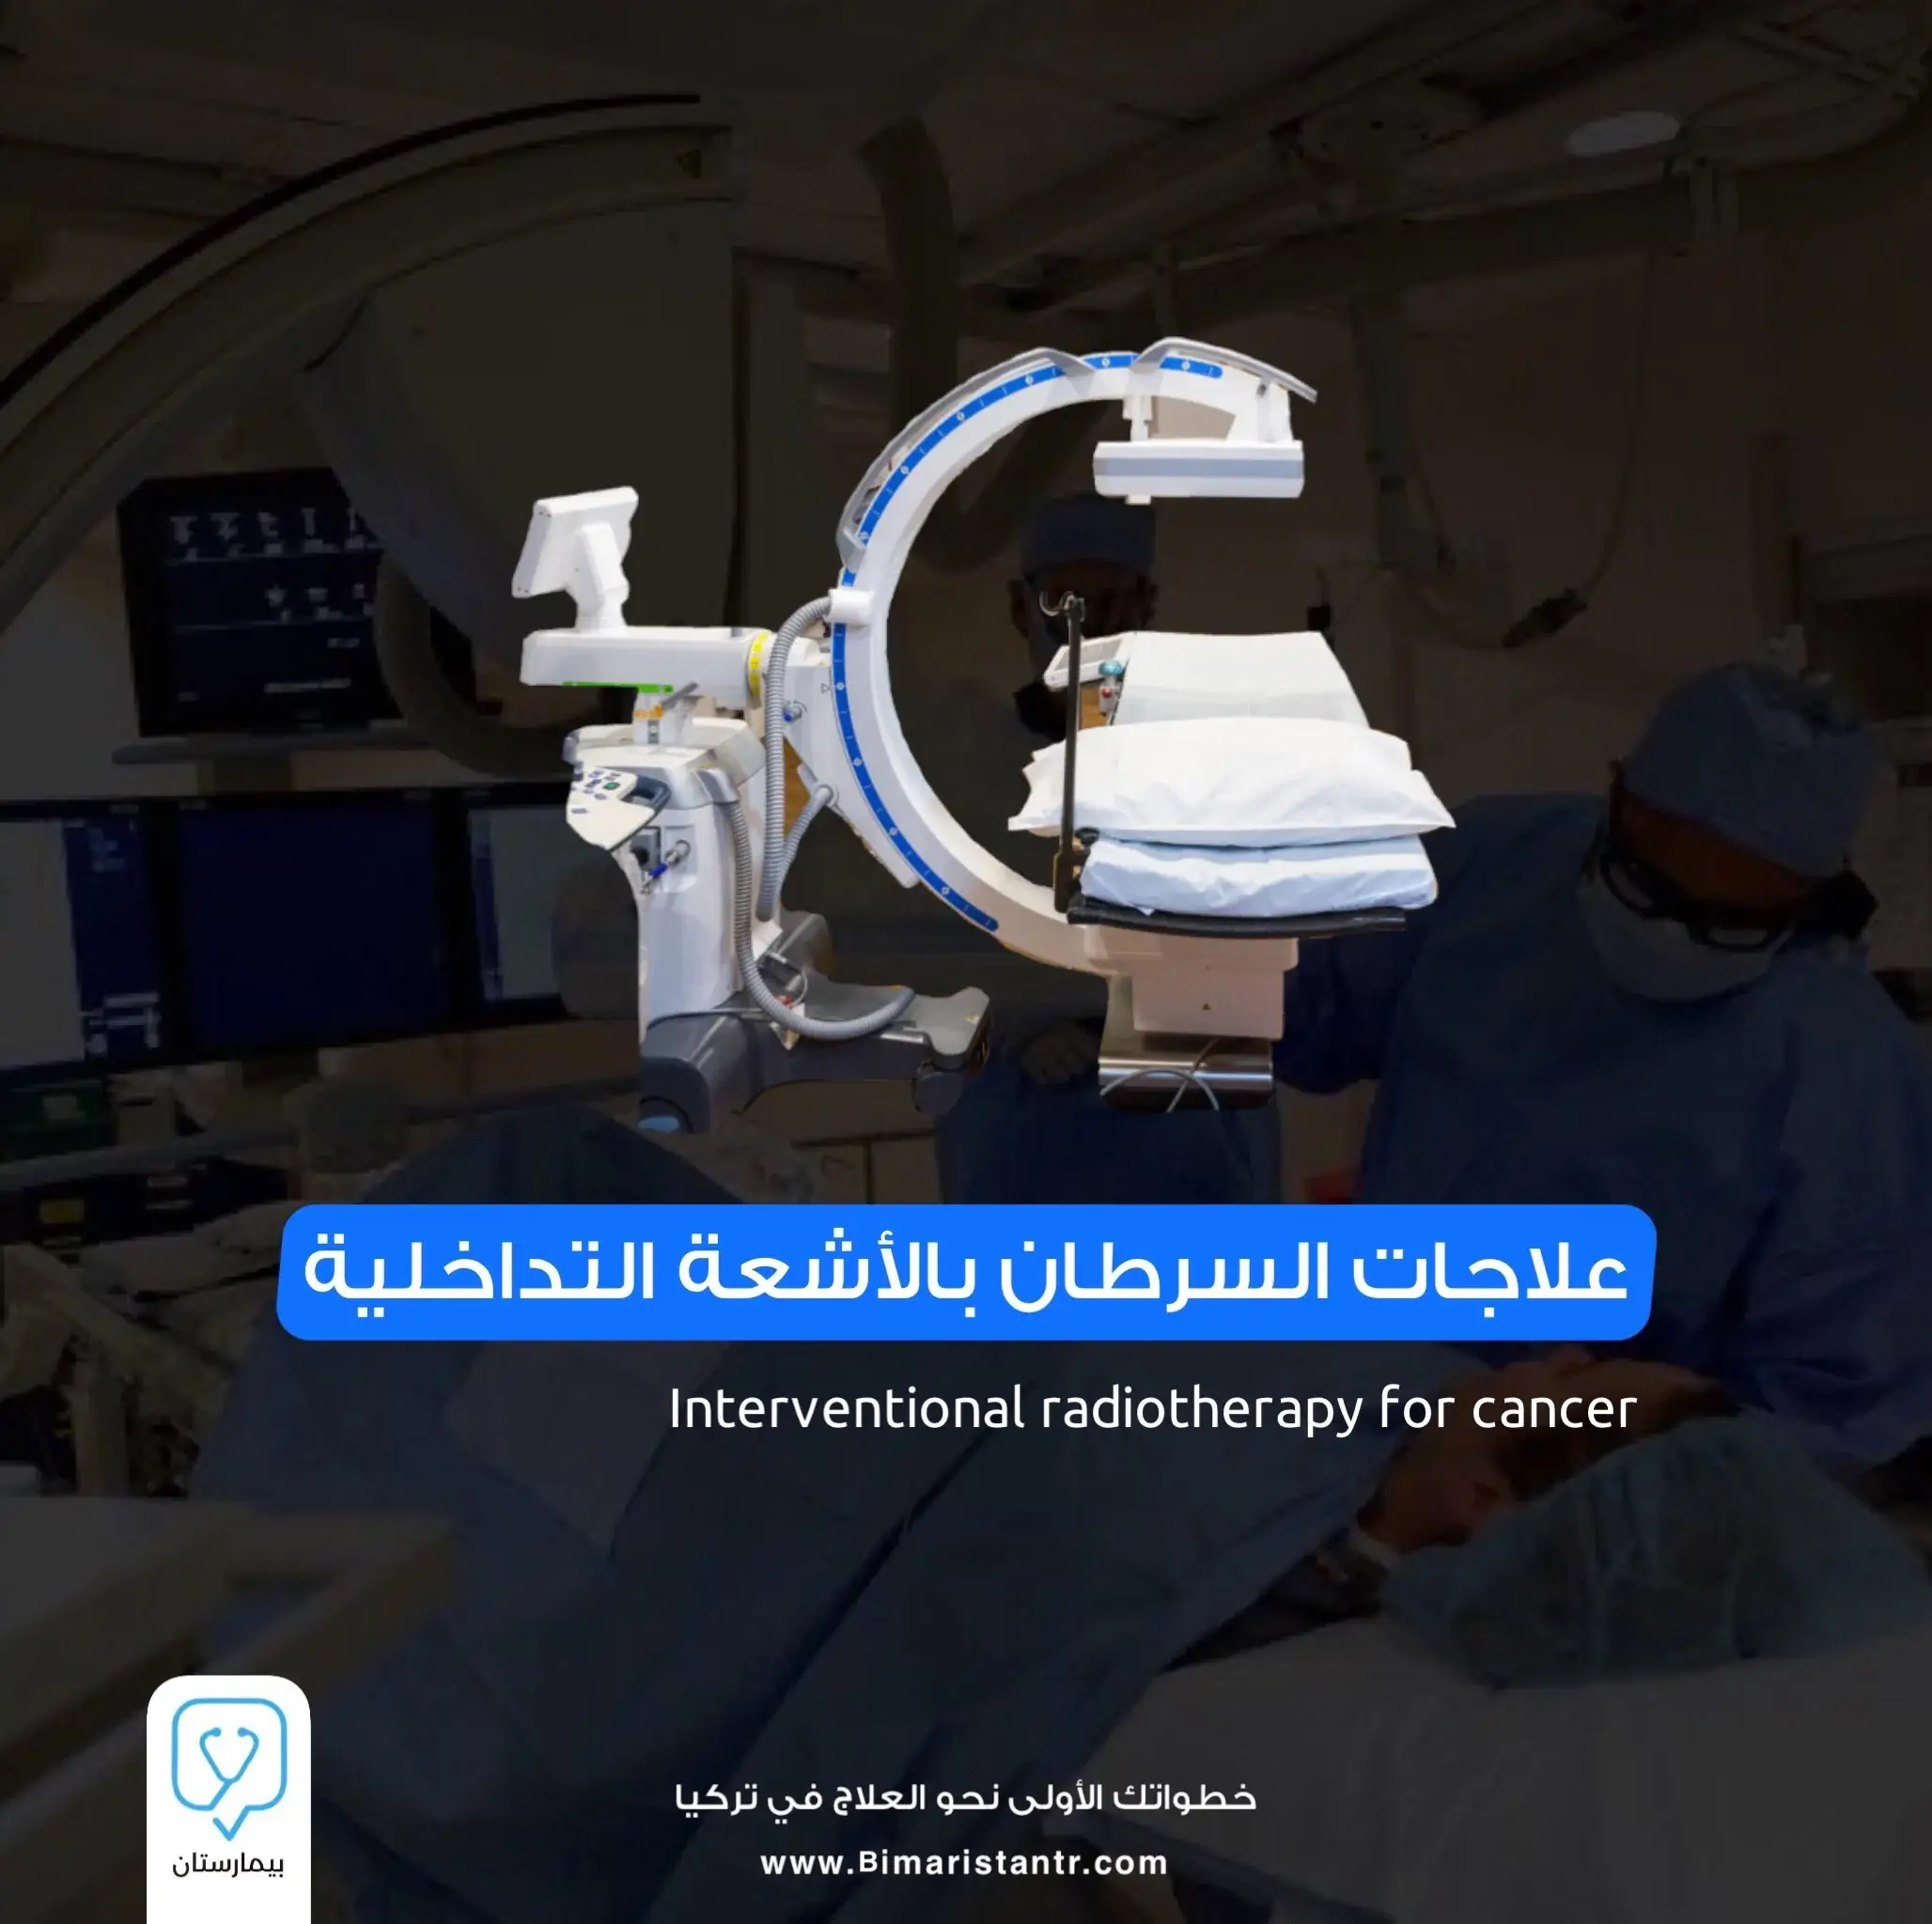 Interventional radiology cancer treatments in Turkey